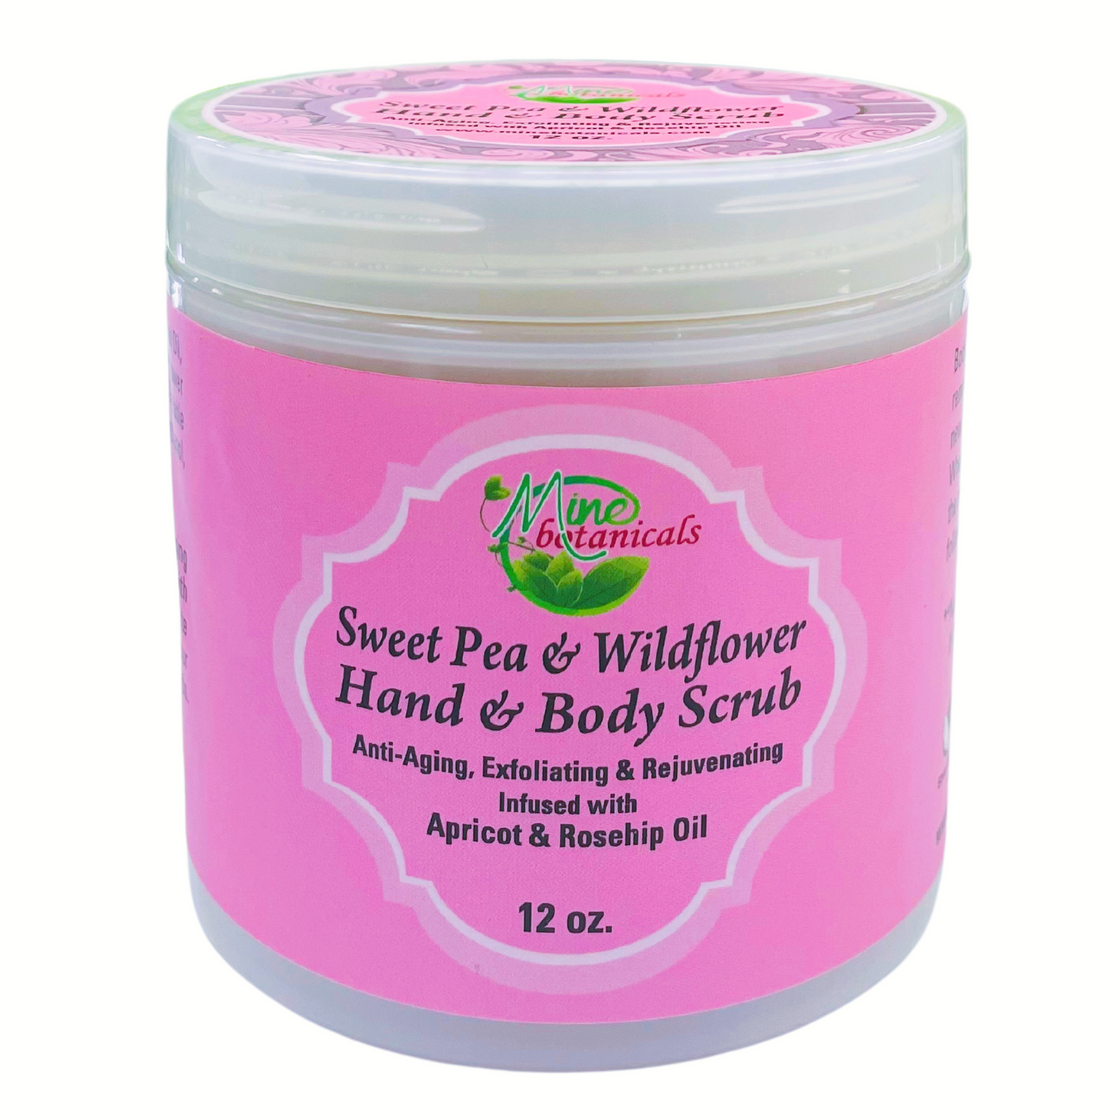 Body Scrub Infused with Sweet Pea & Wildflower